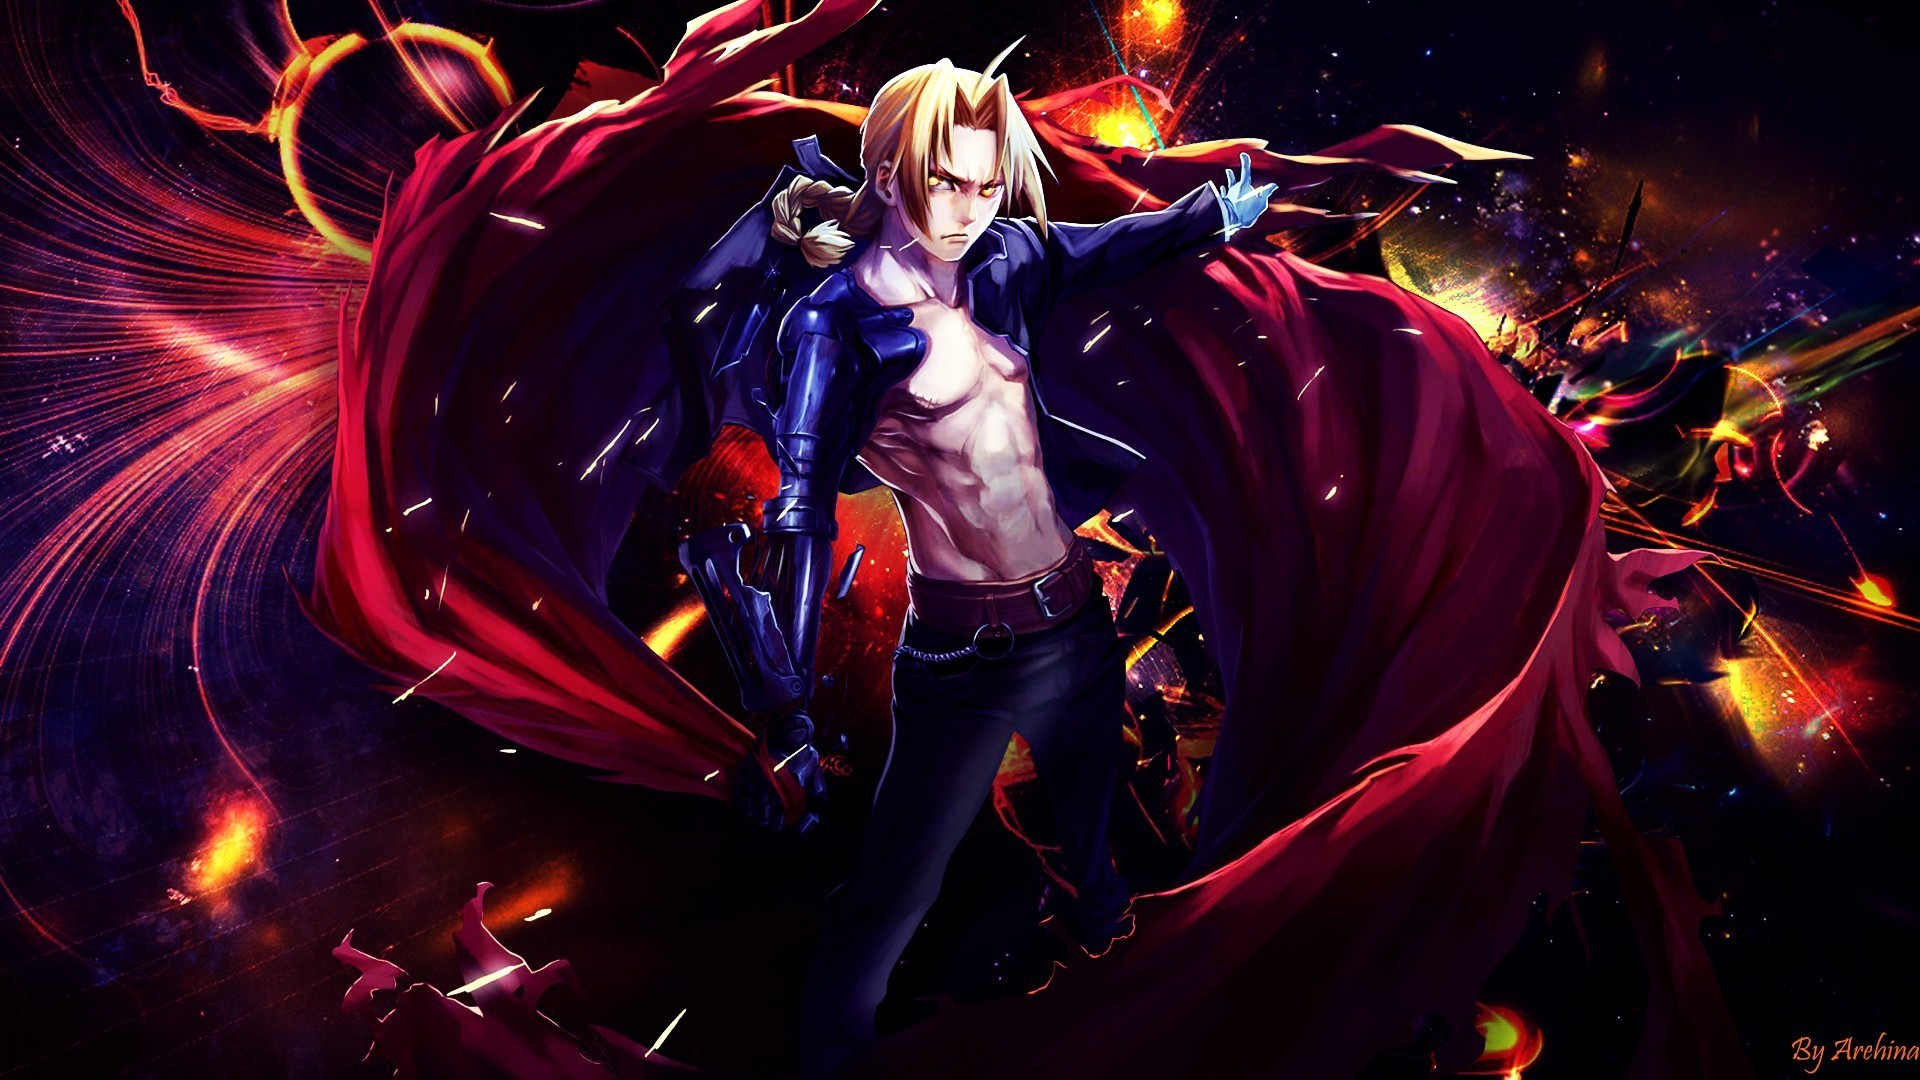 740+ Anime FullMetal Alchemist HD Wallpapers and Backgrounds